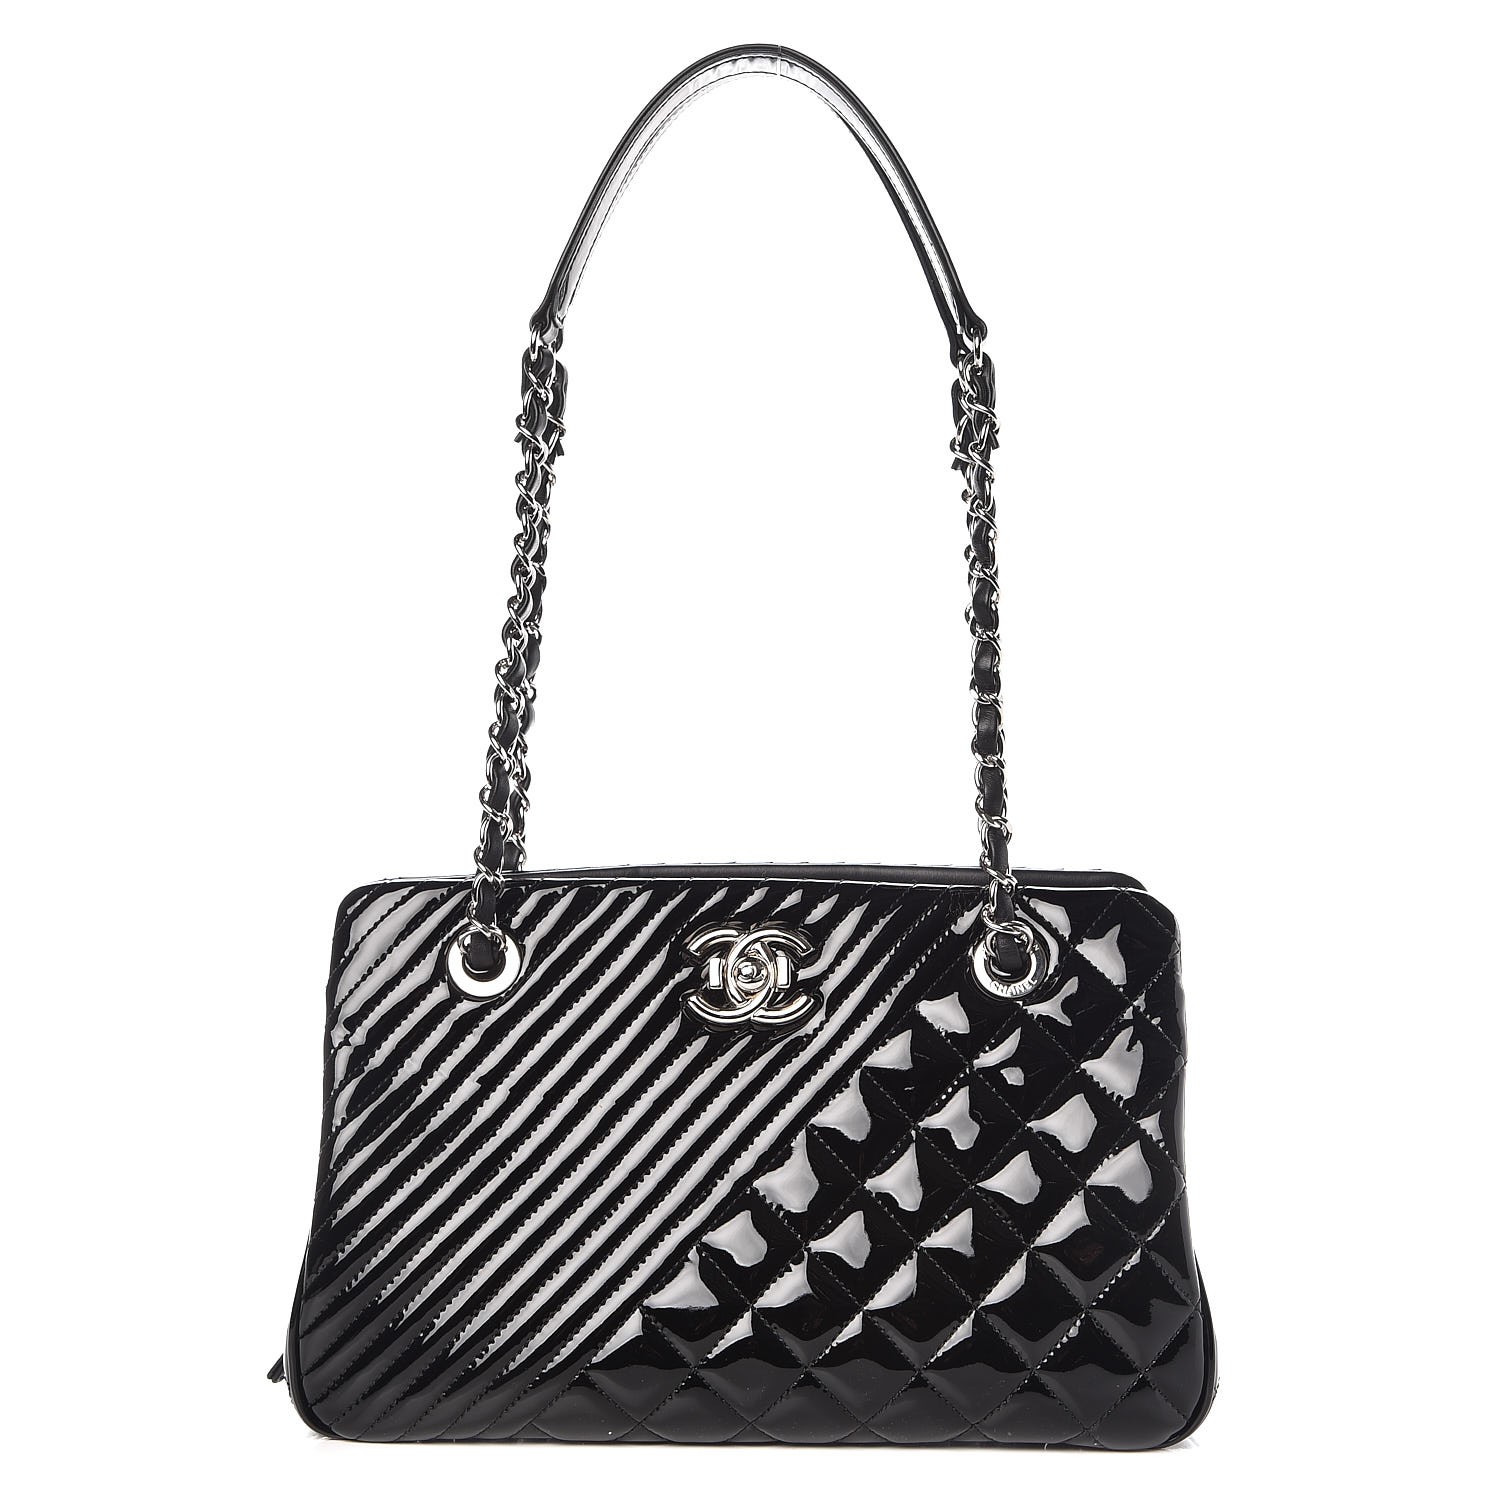 CHANEL Patent Quilted Coco Boy Shoulder Bag Black 304059